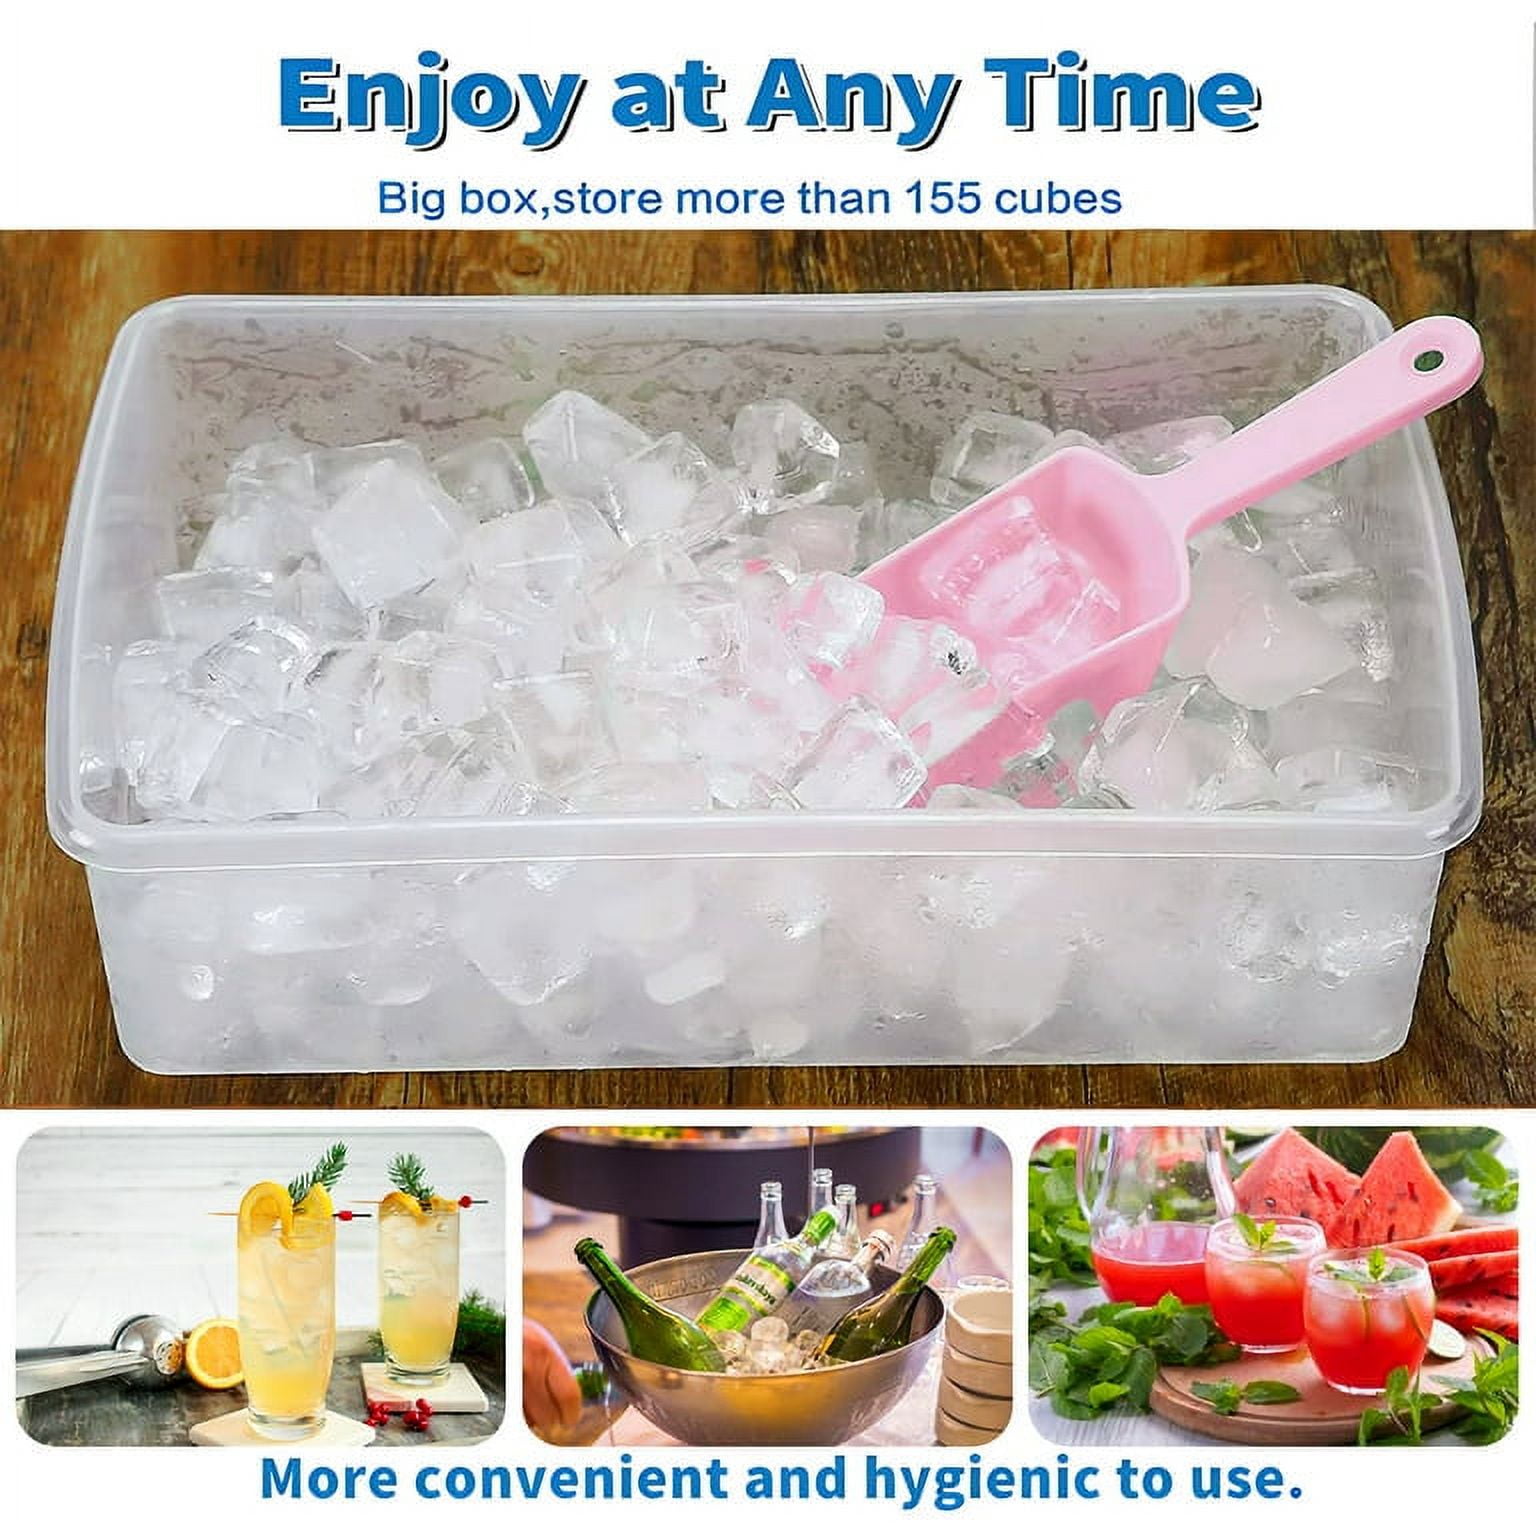 SKYCARPER 2pcs Ice Cube Tray with Lid and Bucket - Large Freezer Ice Tray - Comes with Ice Container, Scoop and Cover - BPA Free Ice Cube Molds 